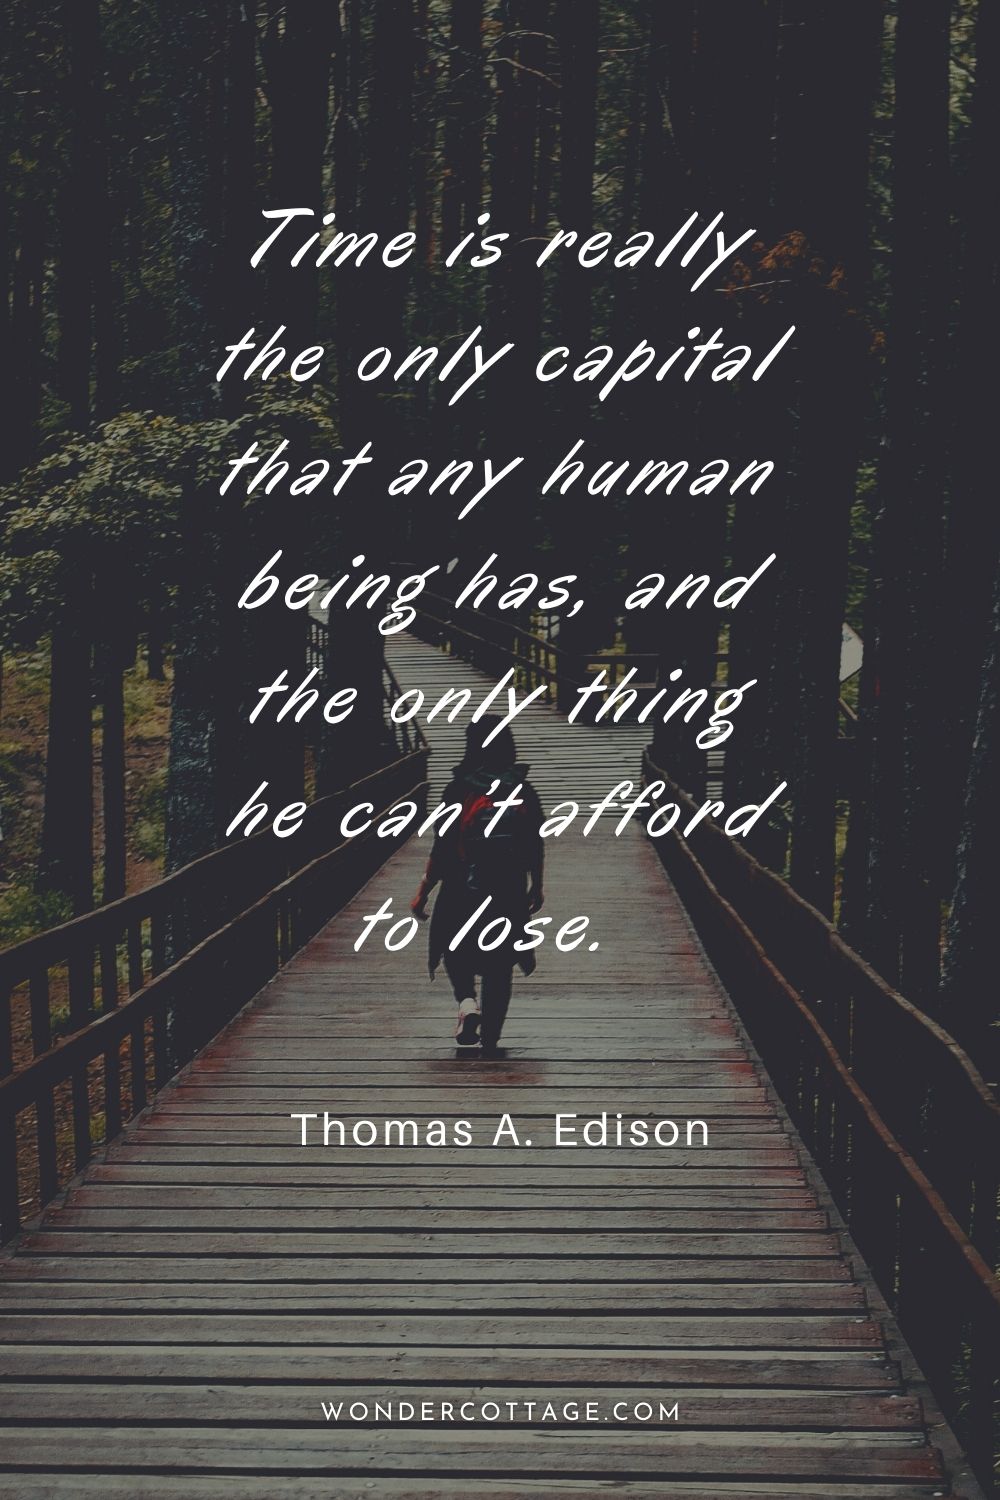 Time is really the only capital that any human being has, and the only thing he can’t afford to lose.  Thomas A. Edison